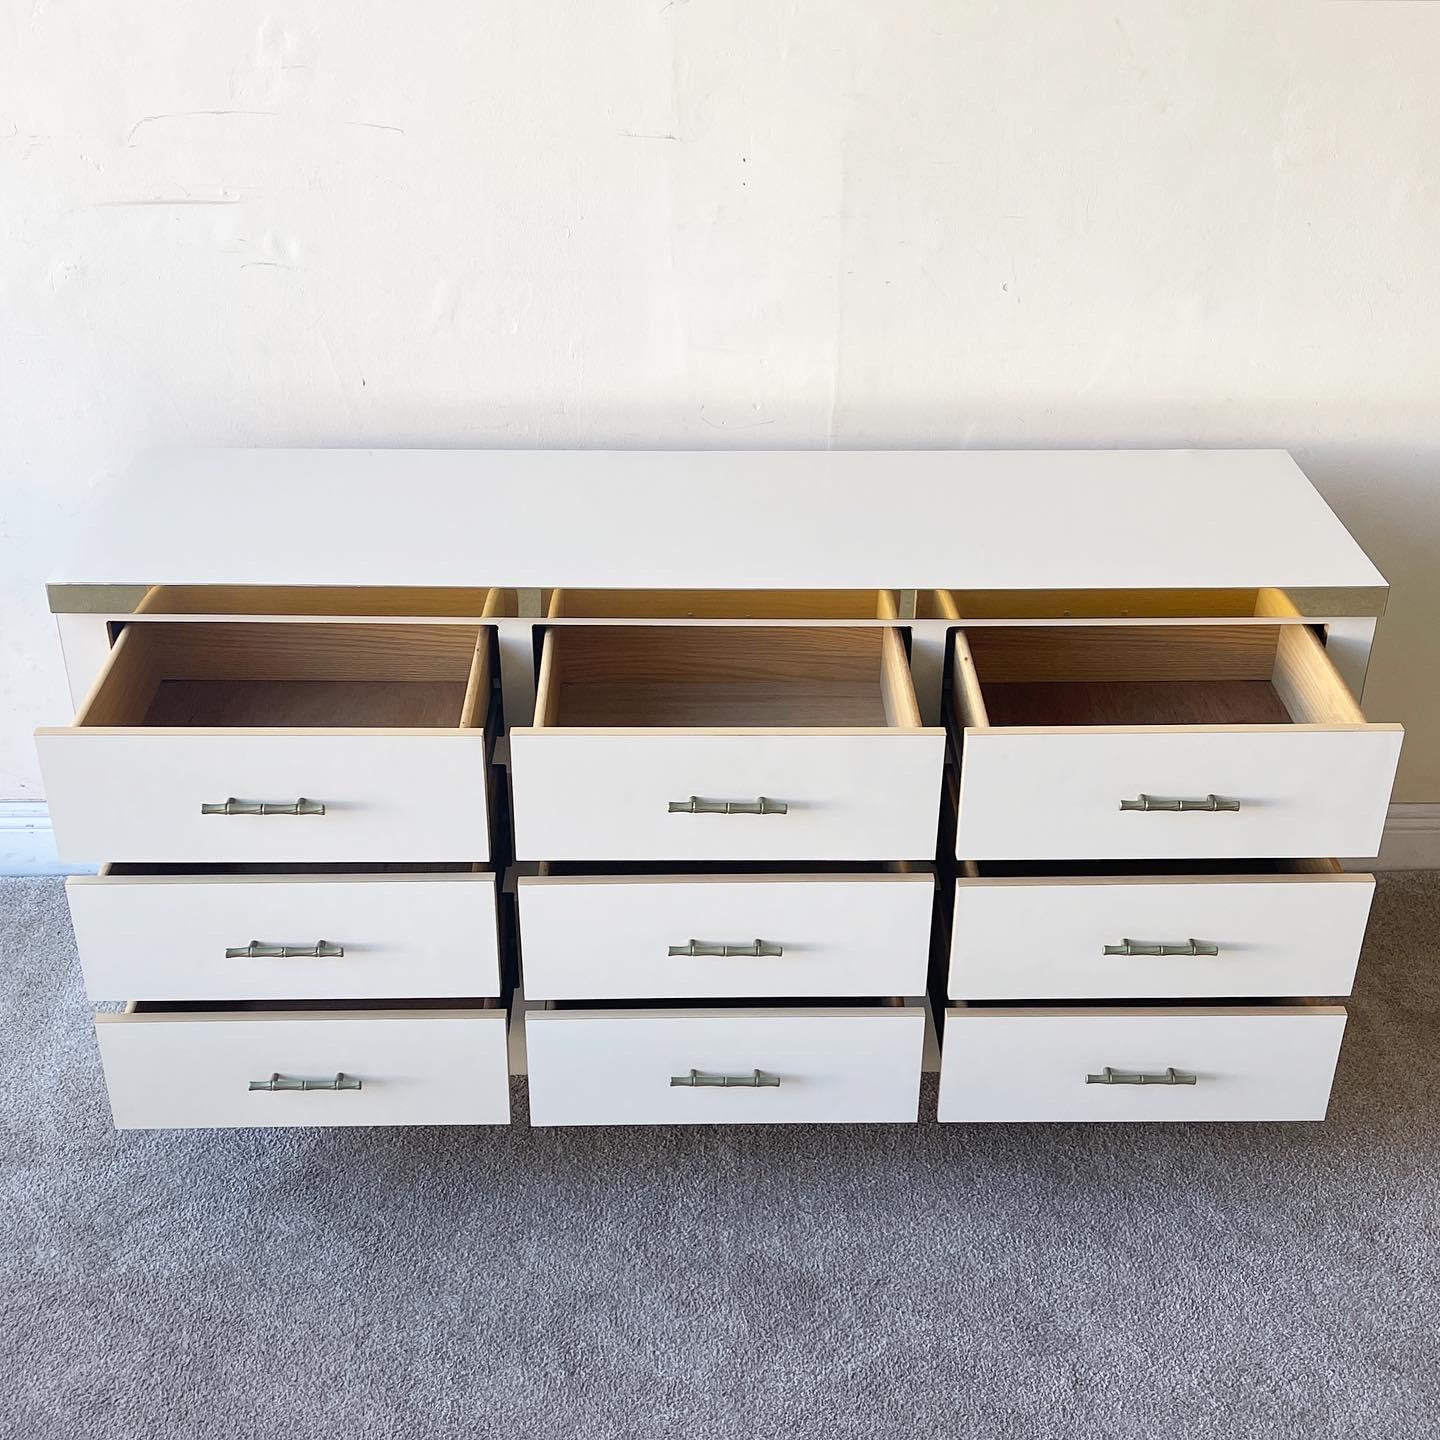 Amazing postmodern triple dresser features a cream lacquer laminate. Each drawer has a faux bamboo brass handle and top top of the dresser has a gold strip bordering the top.

Additional information:
Material: Brass, wood
Color: Cream,